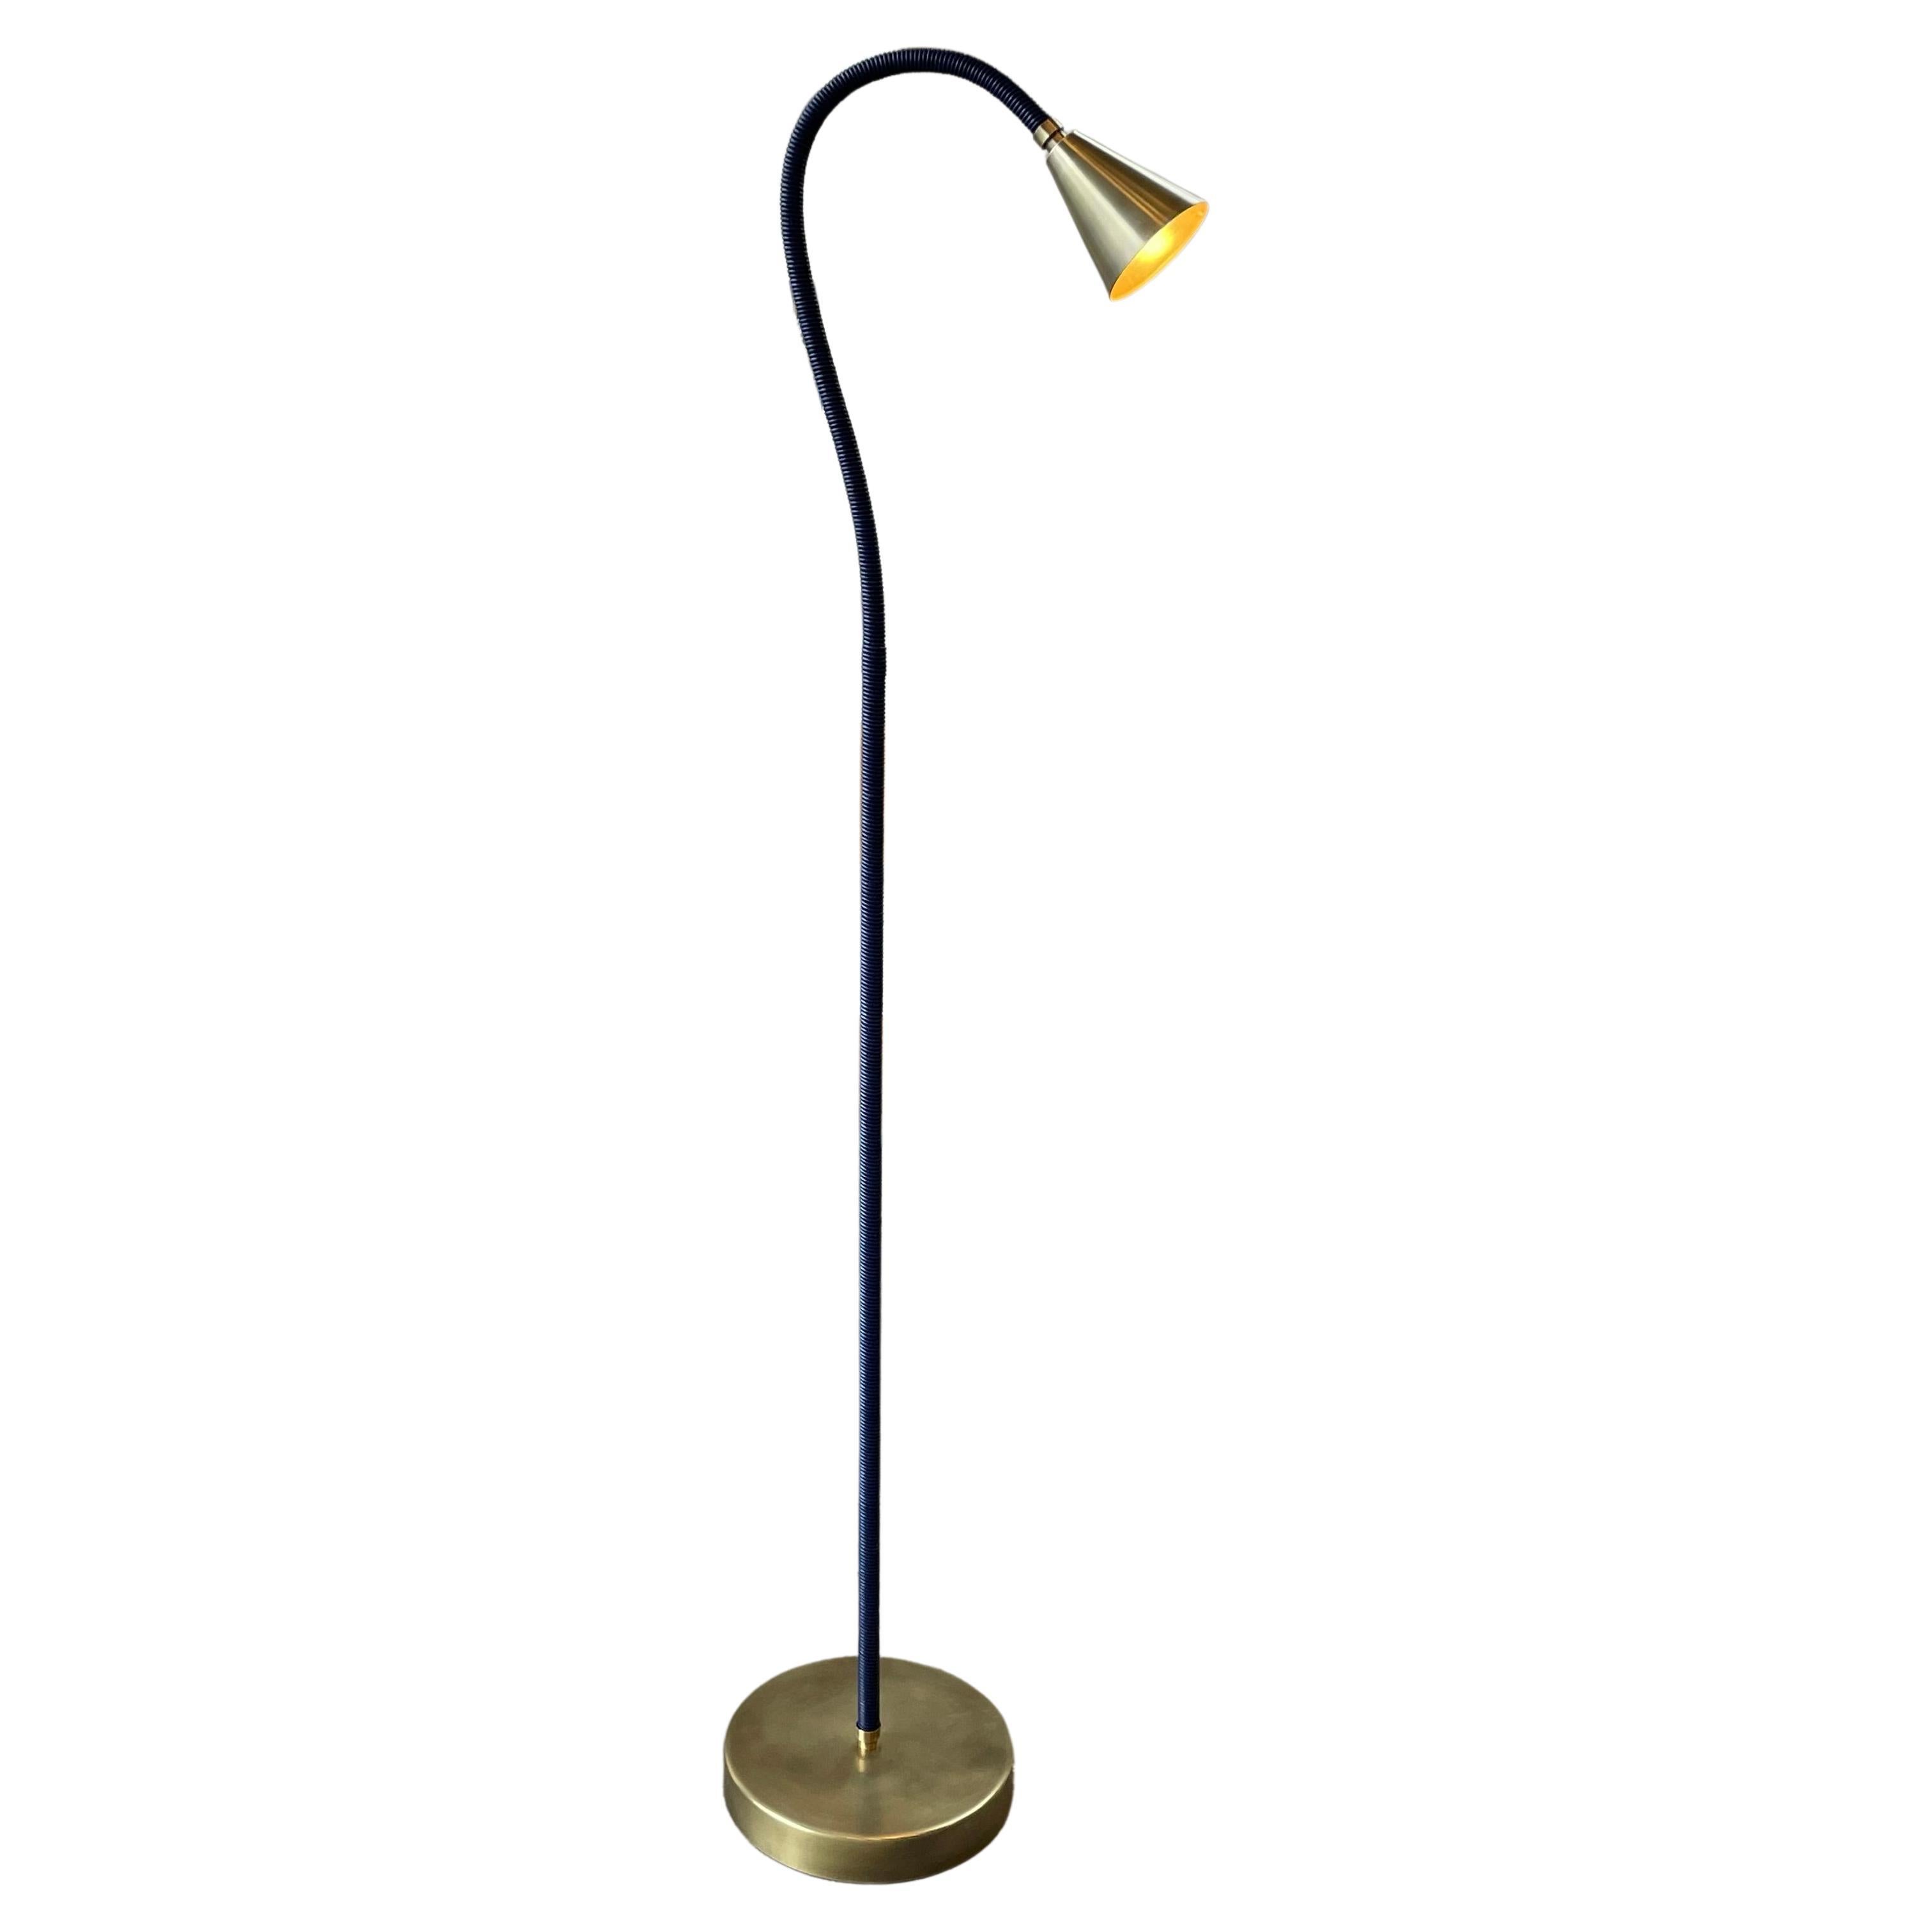 Meander Leather Wrapped Flex Arm Floor Lamp